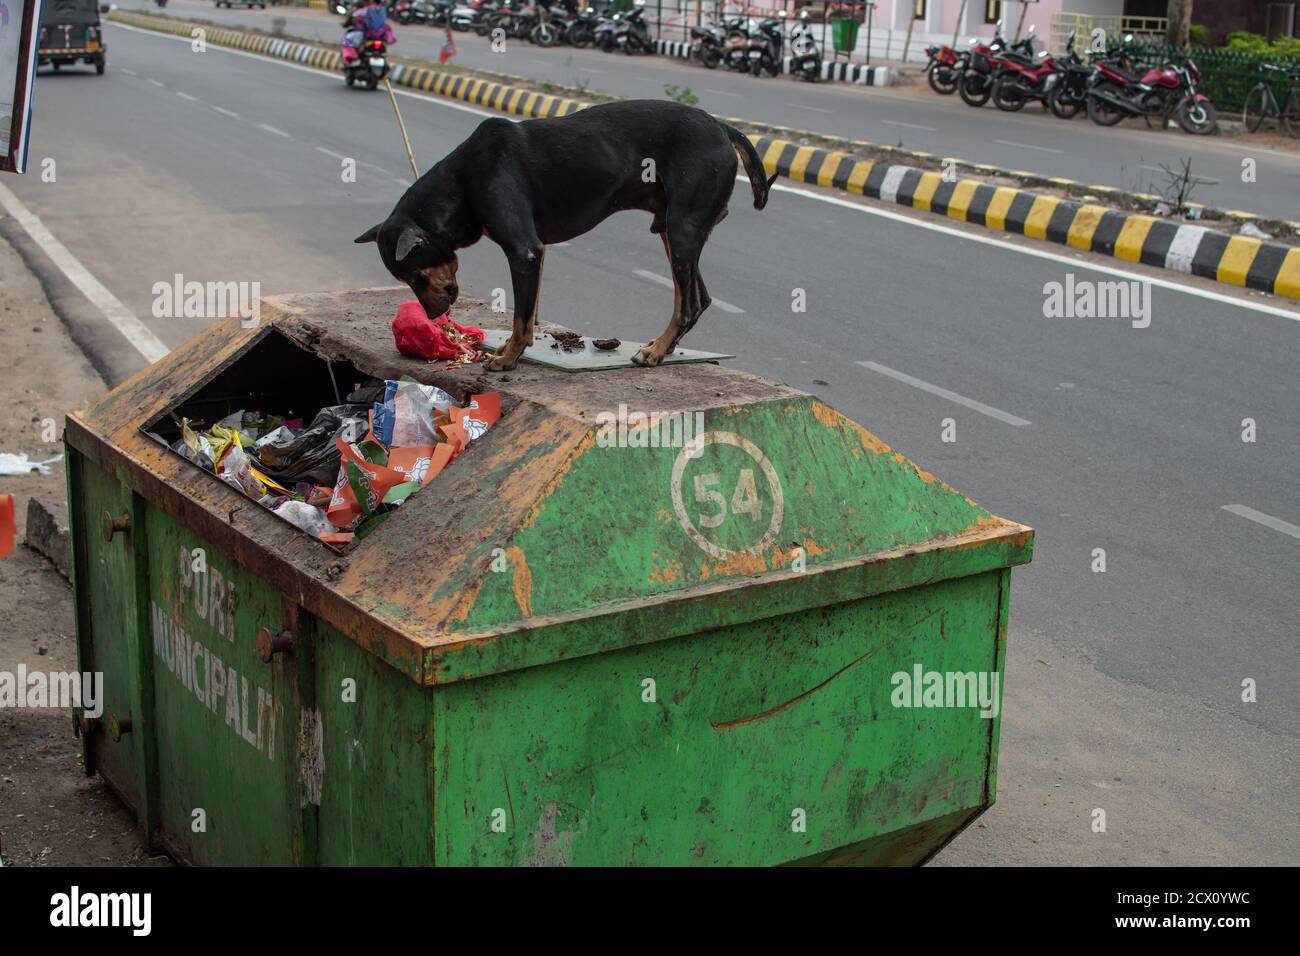 A black stray dog on top of a green container eating food out of a trash plastic bag in Puri Municipality, India Stock Photo